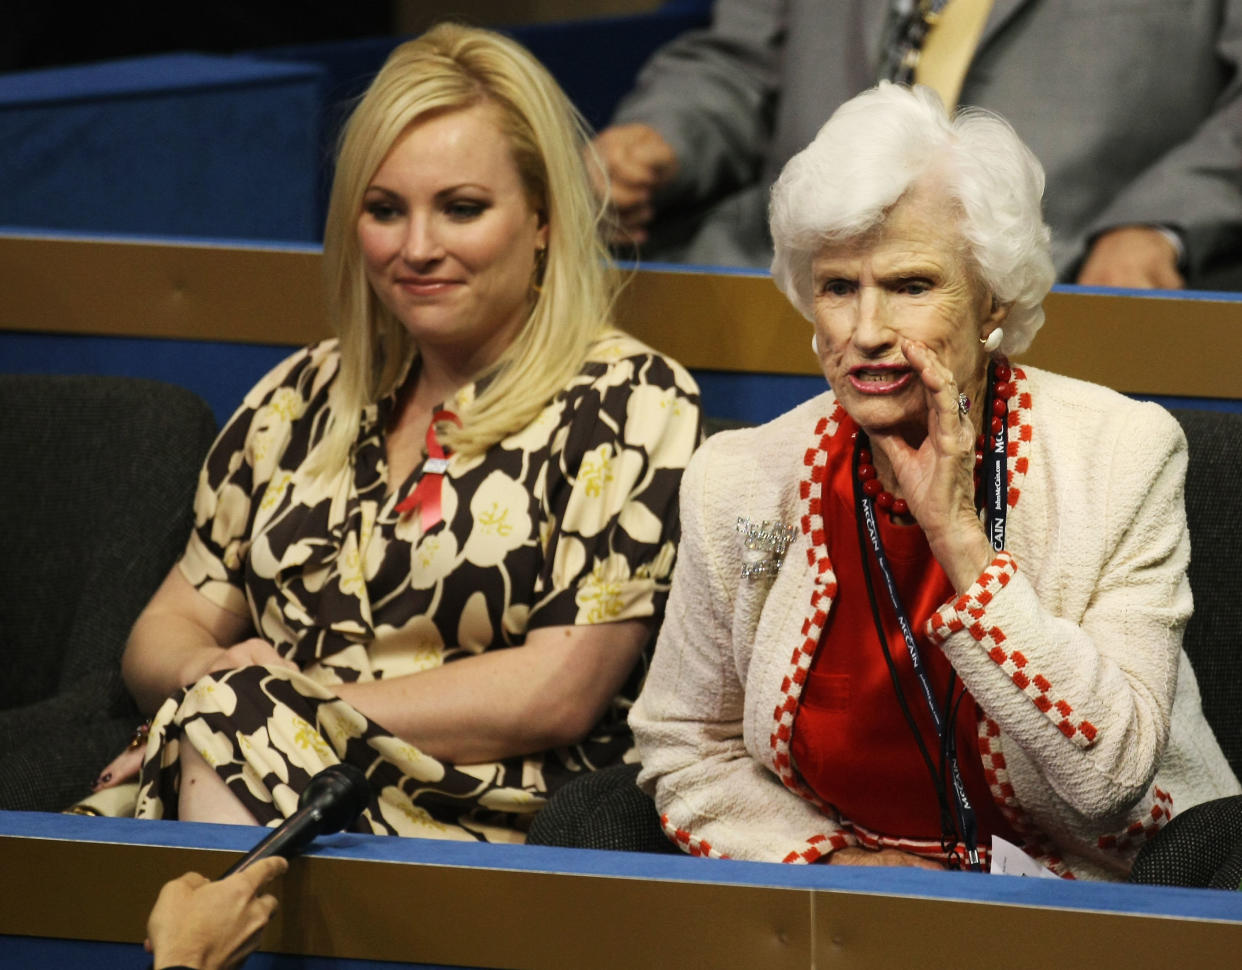 ST. PAUL, MN - SEPTEMBER 01:  Meghan McCain (L), daughter of presumptive Republican presidential nominee U.S. Sen. John McCain (R-AZ), and Roberta McCain (R), mother of Republican presidential candidate Sen. John McCain, sit on day one of the Republican National Convention (RNC) at the Xcel Energy Center September 1, 2008 in St. Paul, Minnesota. The GOP will nominate U.S. Sen. John McCain (R-AZ) as the Republican choice for U.S. President on the last day of the convention.  (Photo by Justin Sullivan/Getty Images)